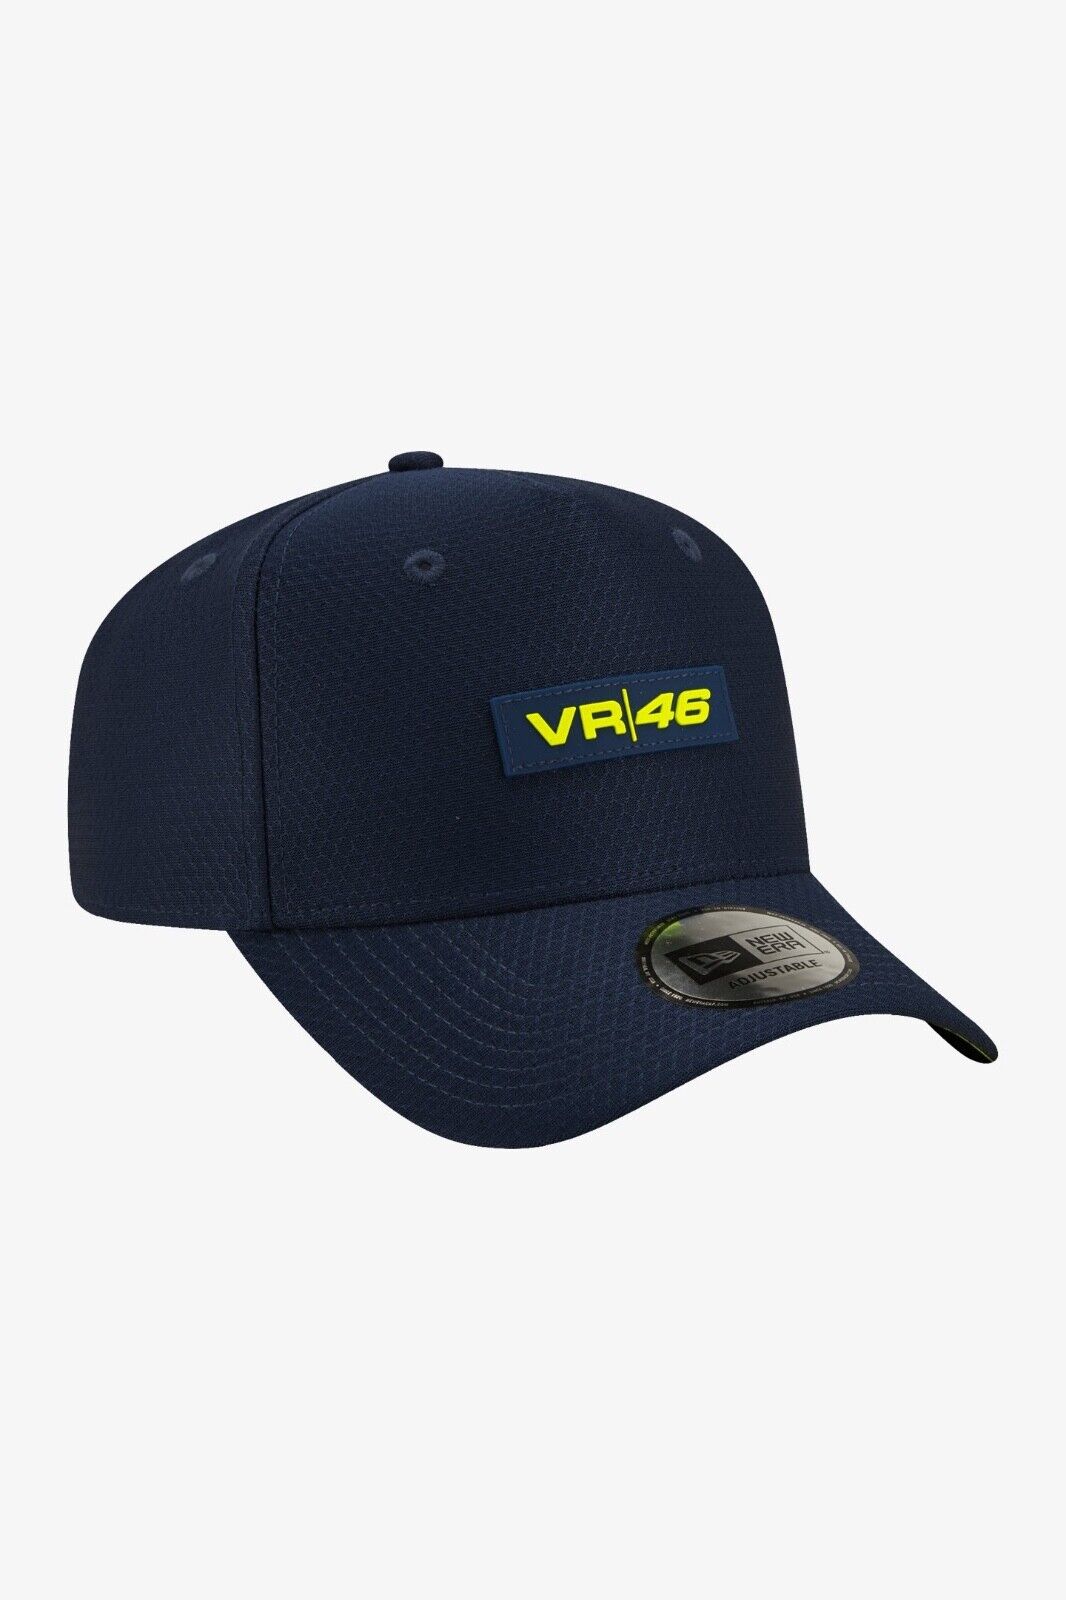 New Era Official Valentino Rossi VR46 Blue Hex 9Forty Baseball Cap - 60221538